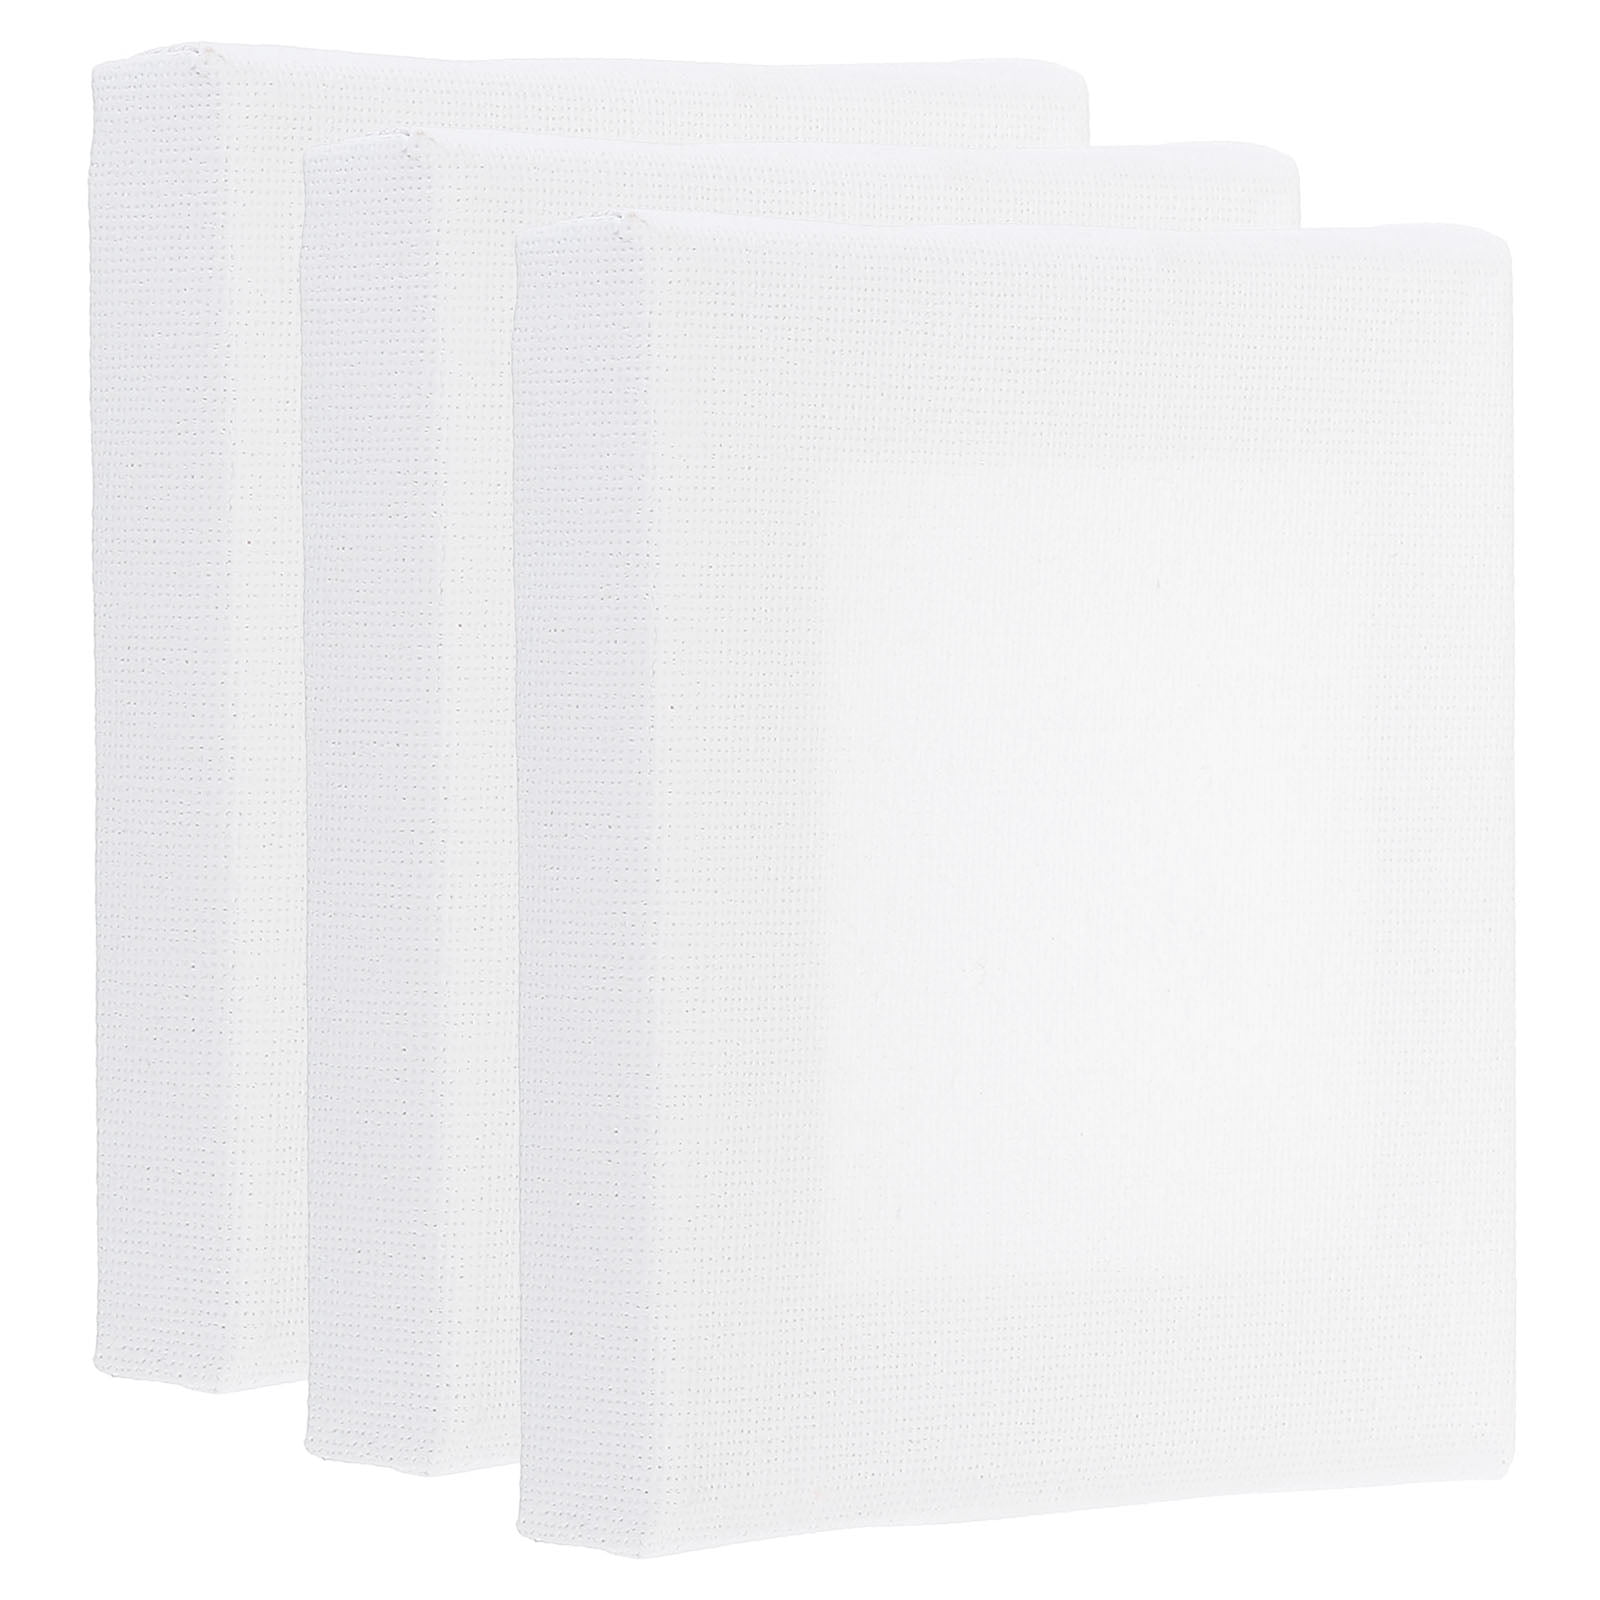 PA Essentials Uncut Blank, Frosted, 3 piece, for Painting on Wood, Canvas,  Paper, Fabric, Wall and Tile, Reusable DIY Art and Craft Stencils for  Painting, 12x12 Inches